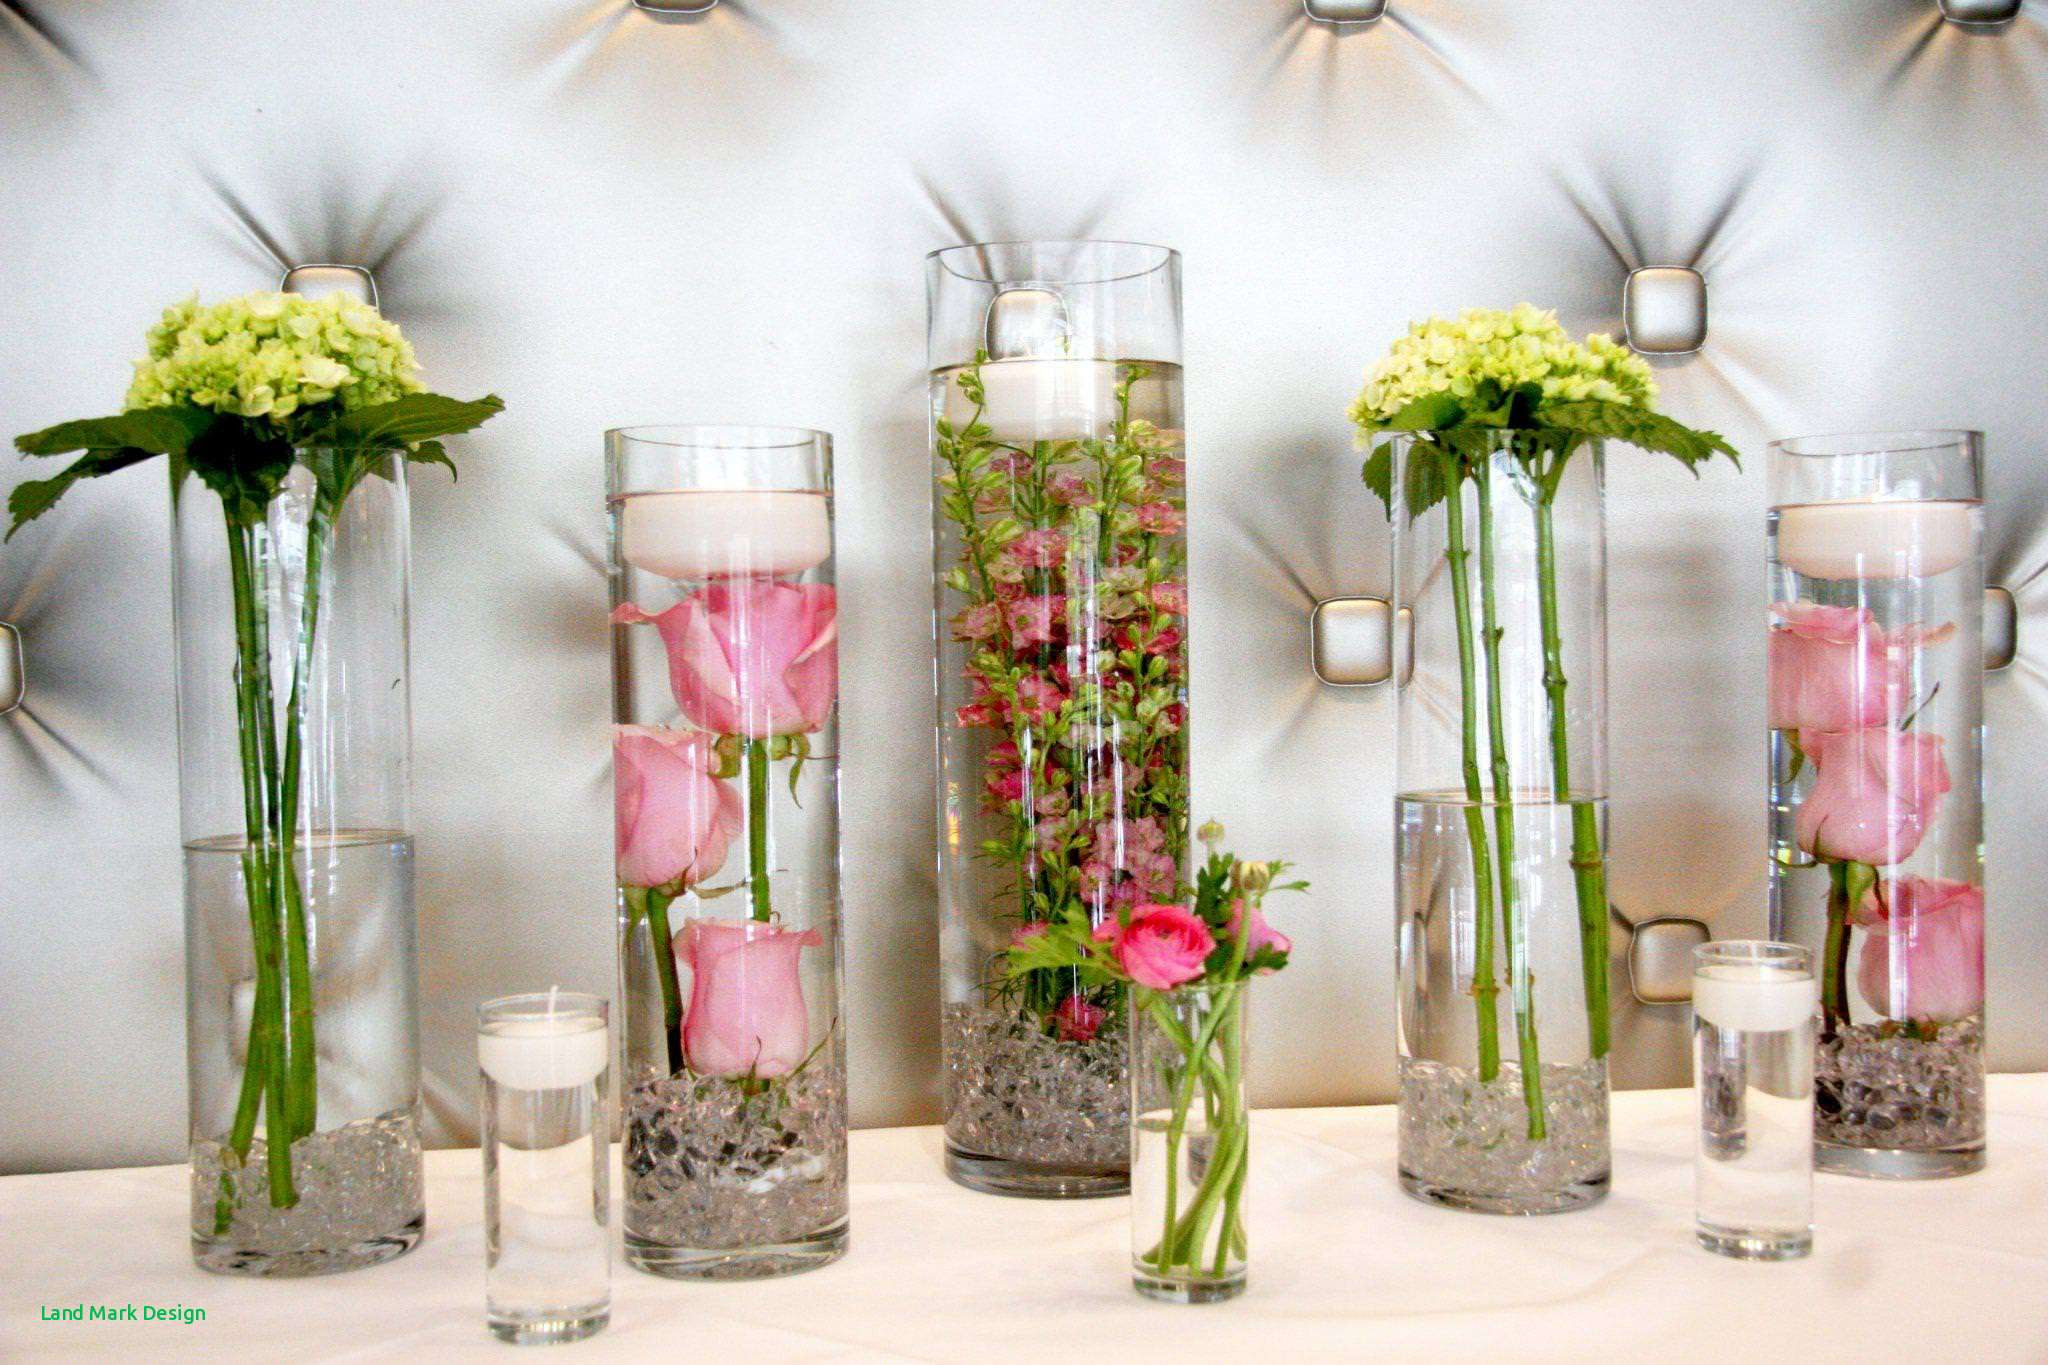 20 Famous Flower Arrangements In Tall Glass Vases 2024 free download flower arrangements in tall glass vases of large flower vase design home design within floor decor vase tall ideash vases large arrangement ideas fill a substantial with of led branches